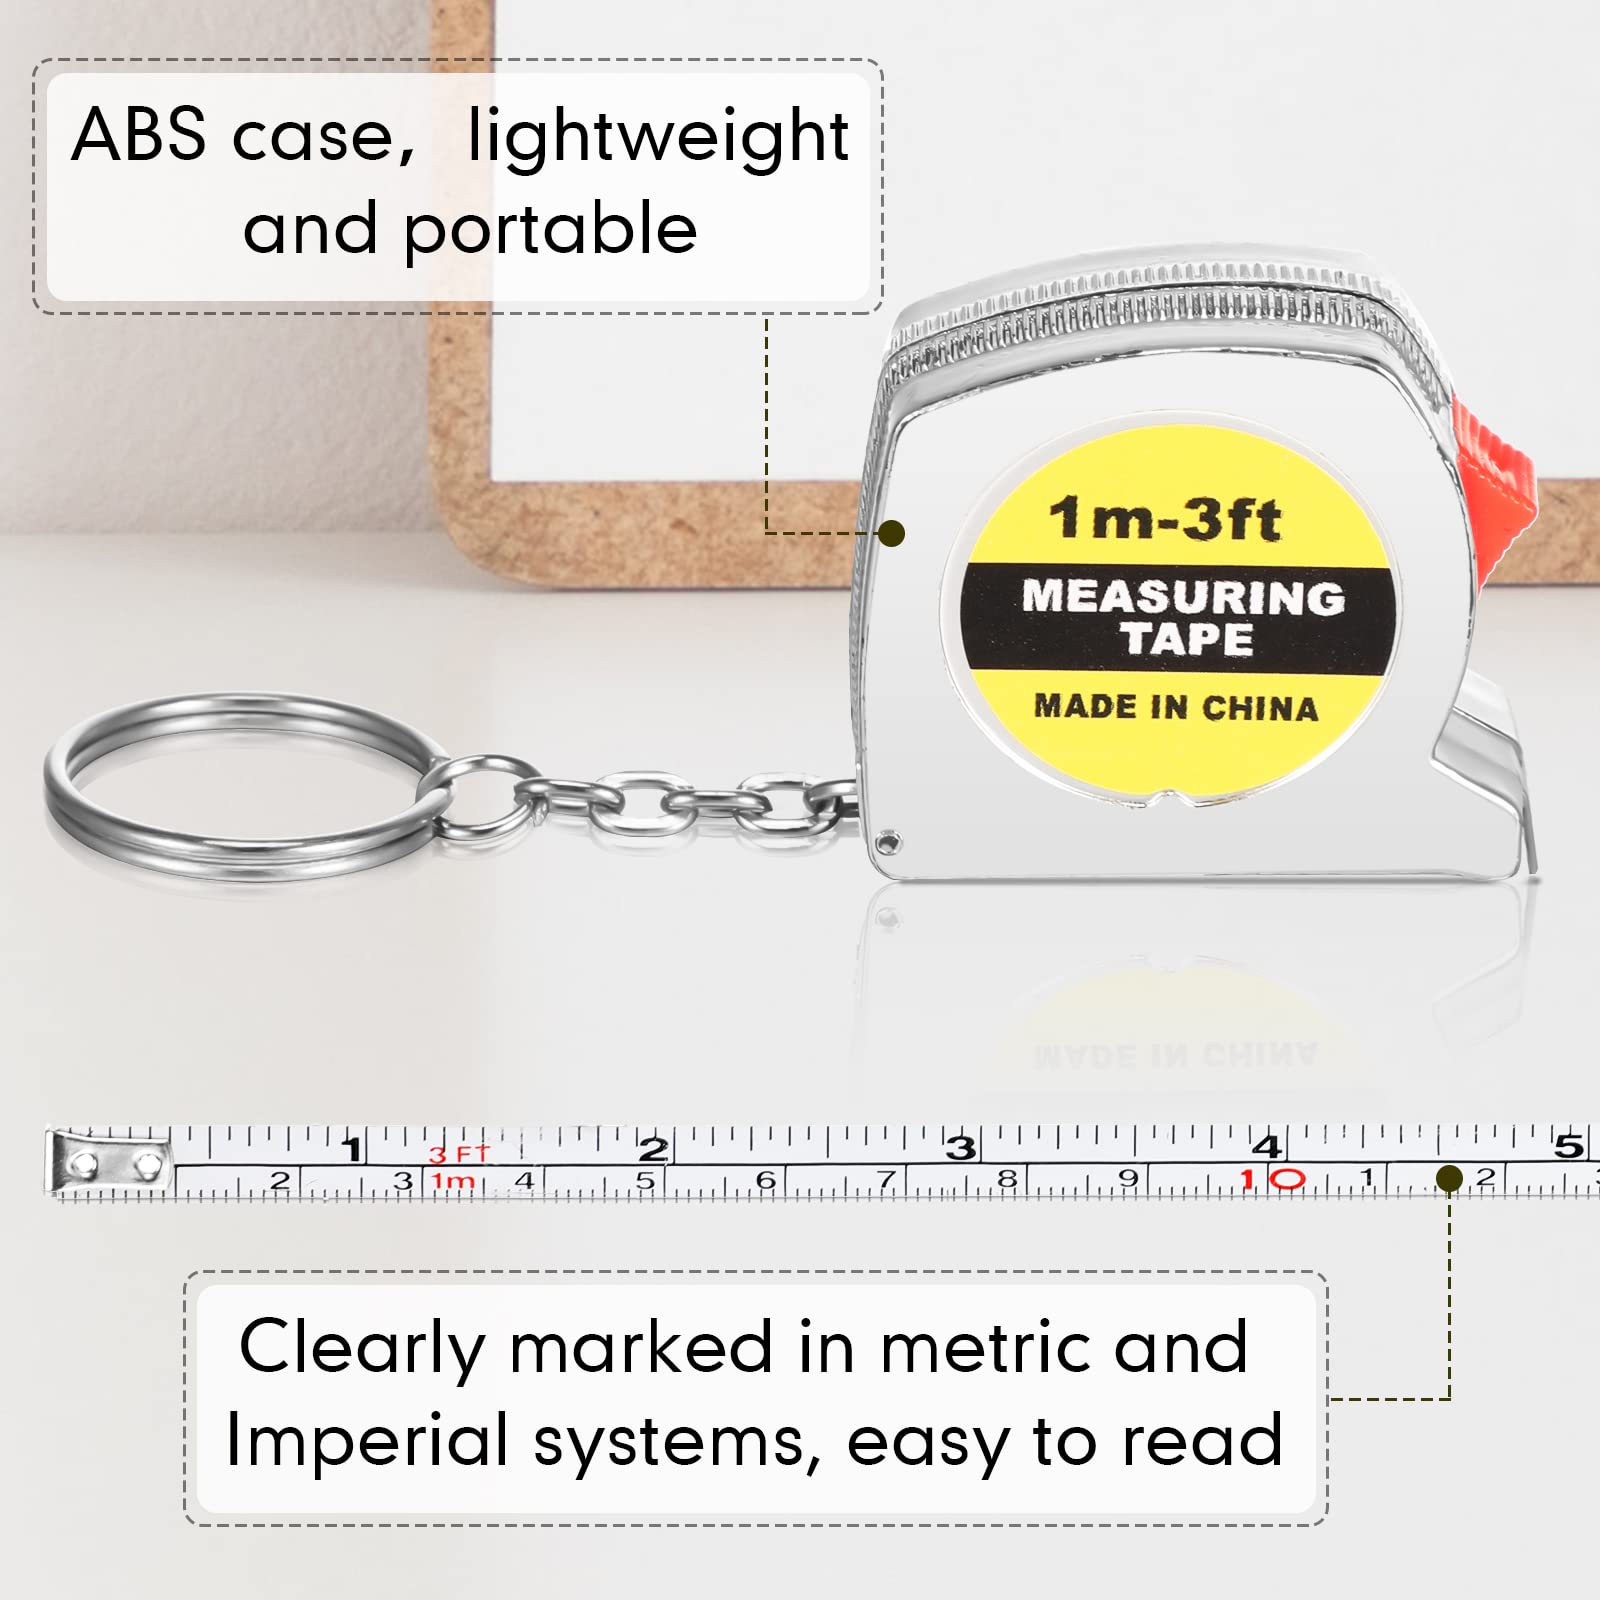 Small Tape Measure Mini Retractable Measuring Tape Keychains 1 Meter/ 3 Feet Functional Mini Measuring Tape, Metric and Inch with Slide Lock for Daily Use Body Measurement(30 Pieces)